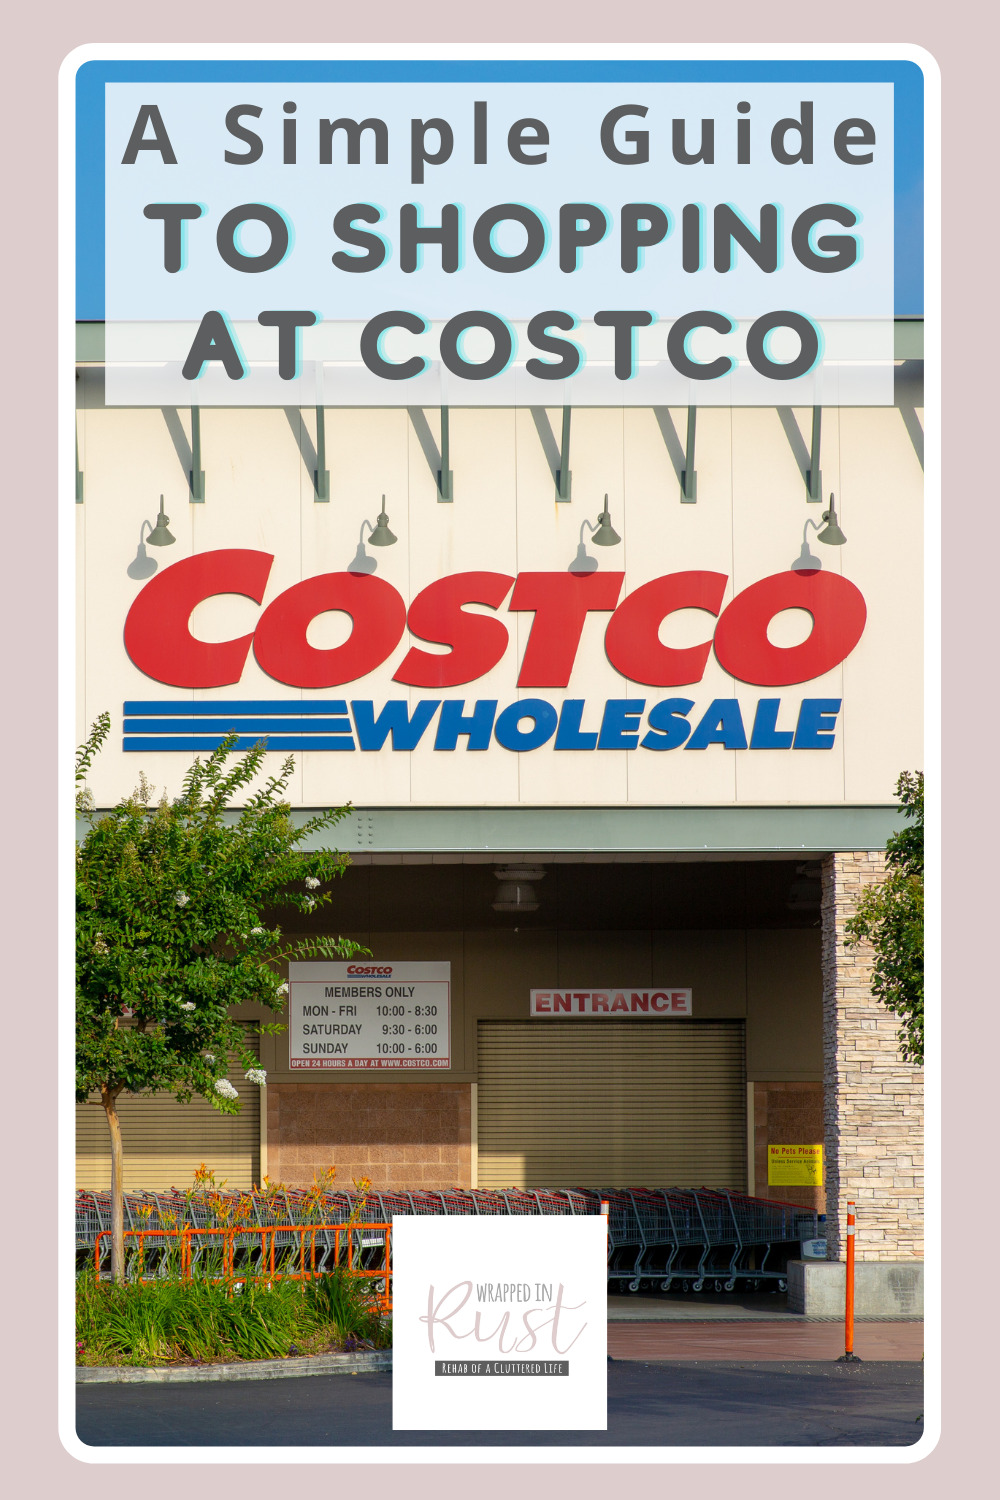 Wrappedinrust.com has the best ideas for making your life simple, clean, and easy. If you shop at Costco, you're definitely looking for the best deals you can get! Max your savings with this guide to what you should and shouldn't buy at Costco.